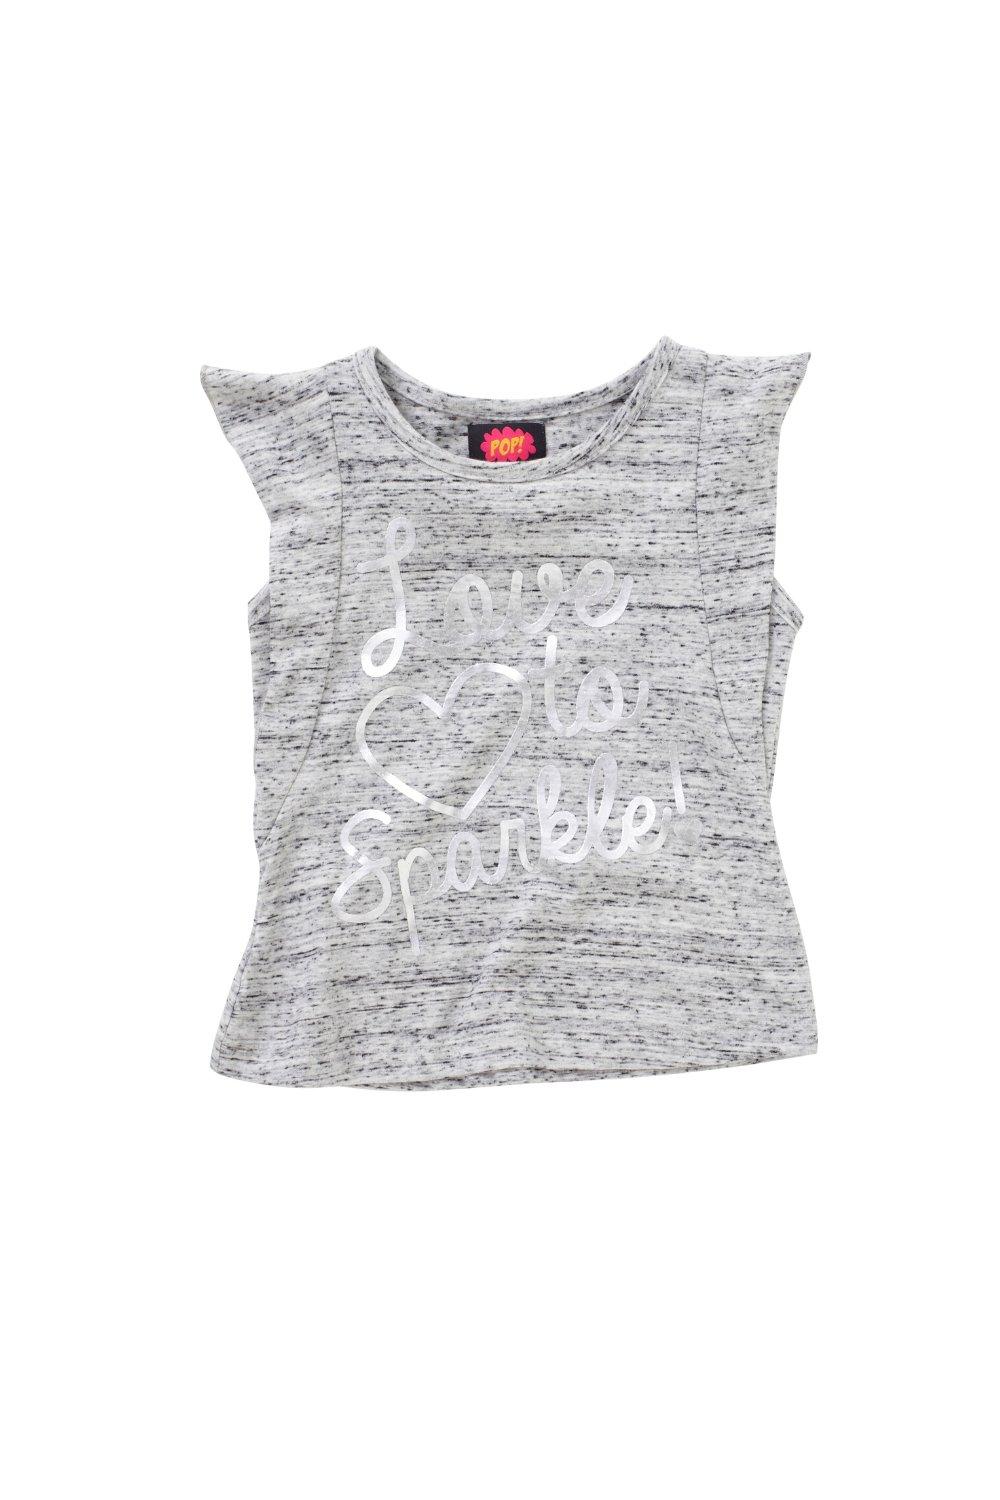 Love To Sparkle Short Sleeve T-shirt